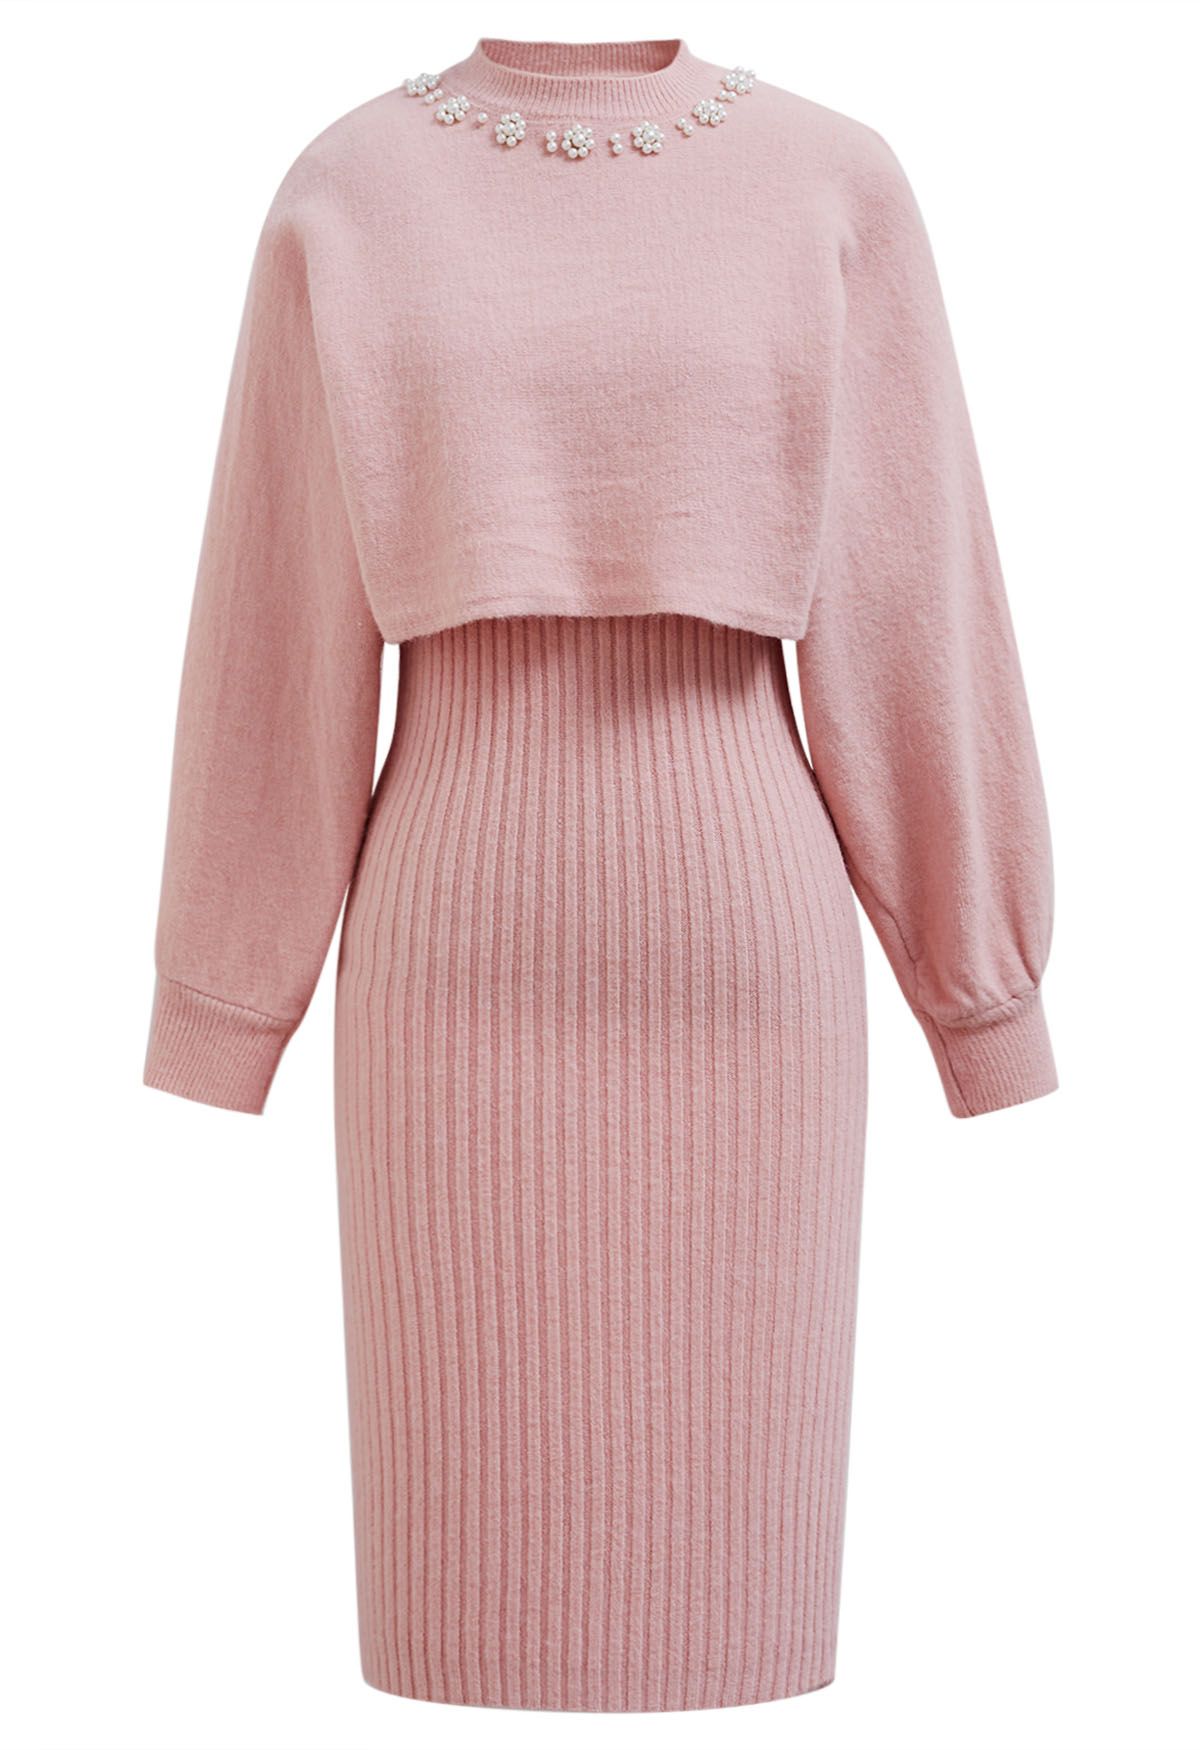 Pearl Neckline Ribbed Knit Twinset Dress in Pink